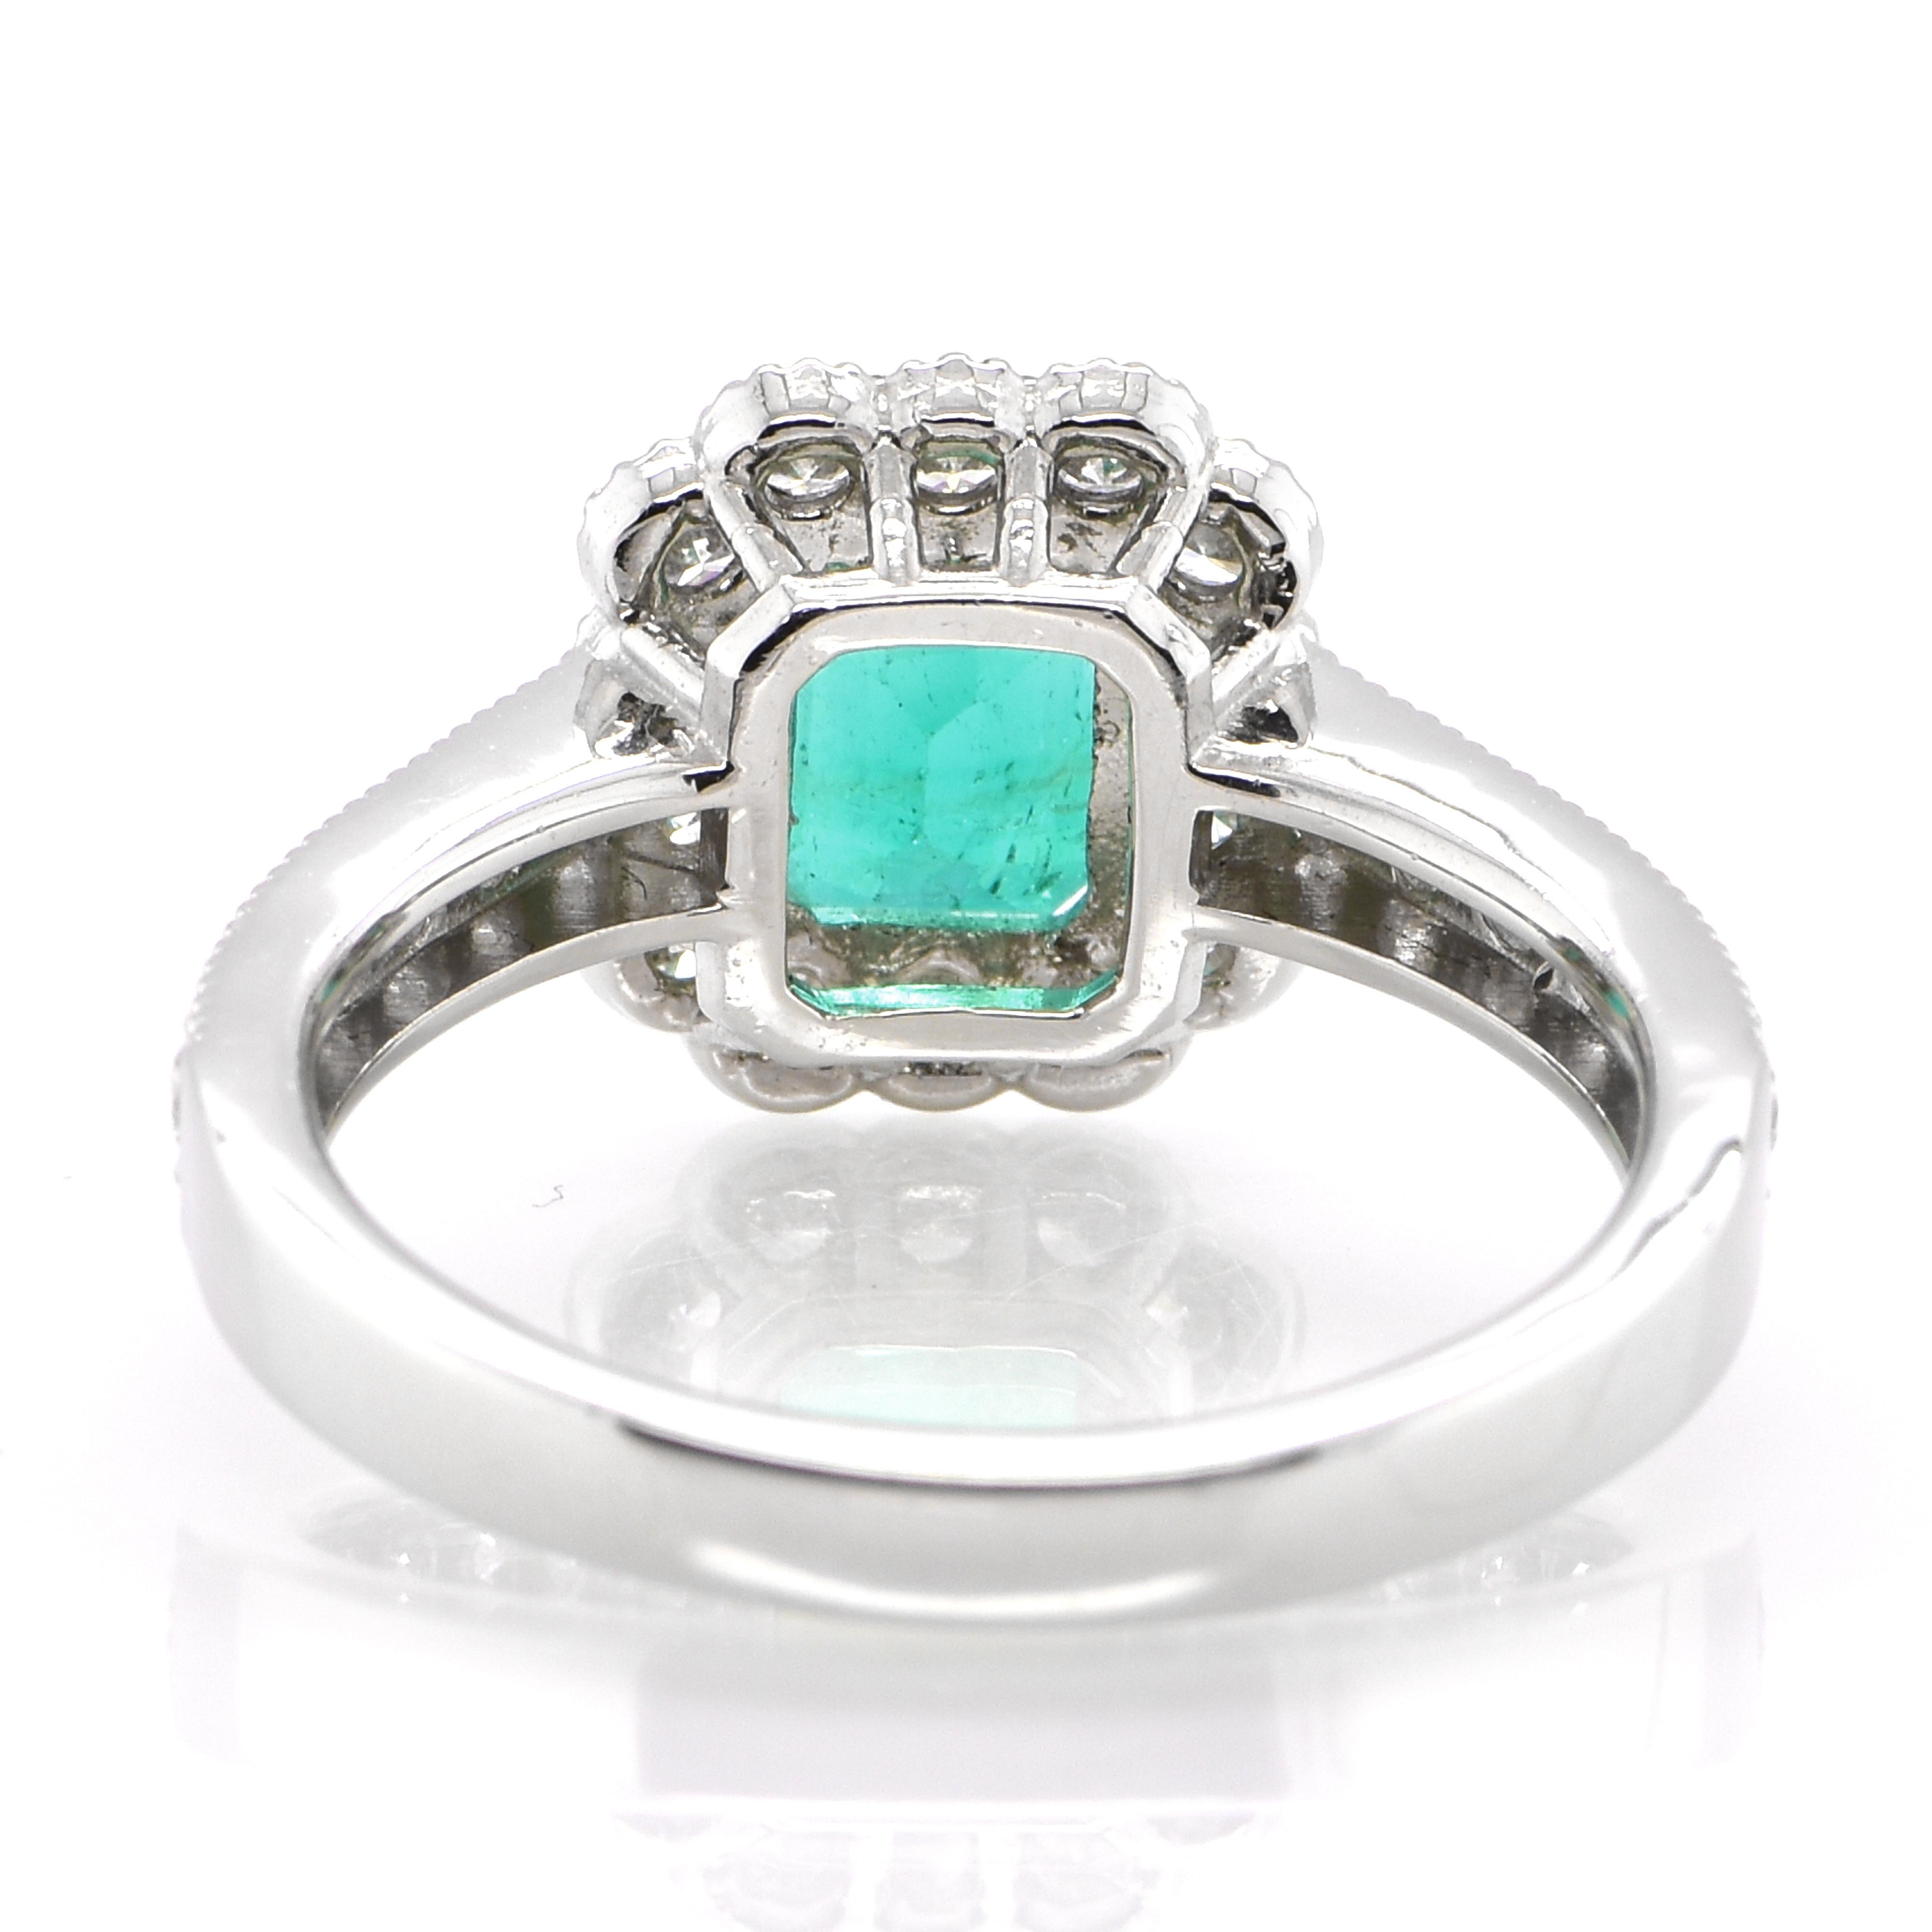 Women's 1.47 Carat Natural Colombian Emerald and Diamond Ring Set in Platinum For Sale